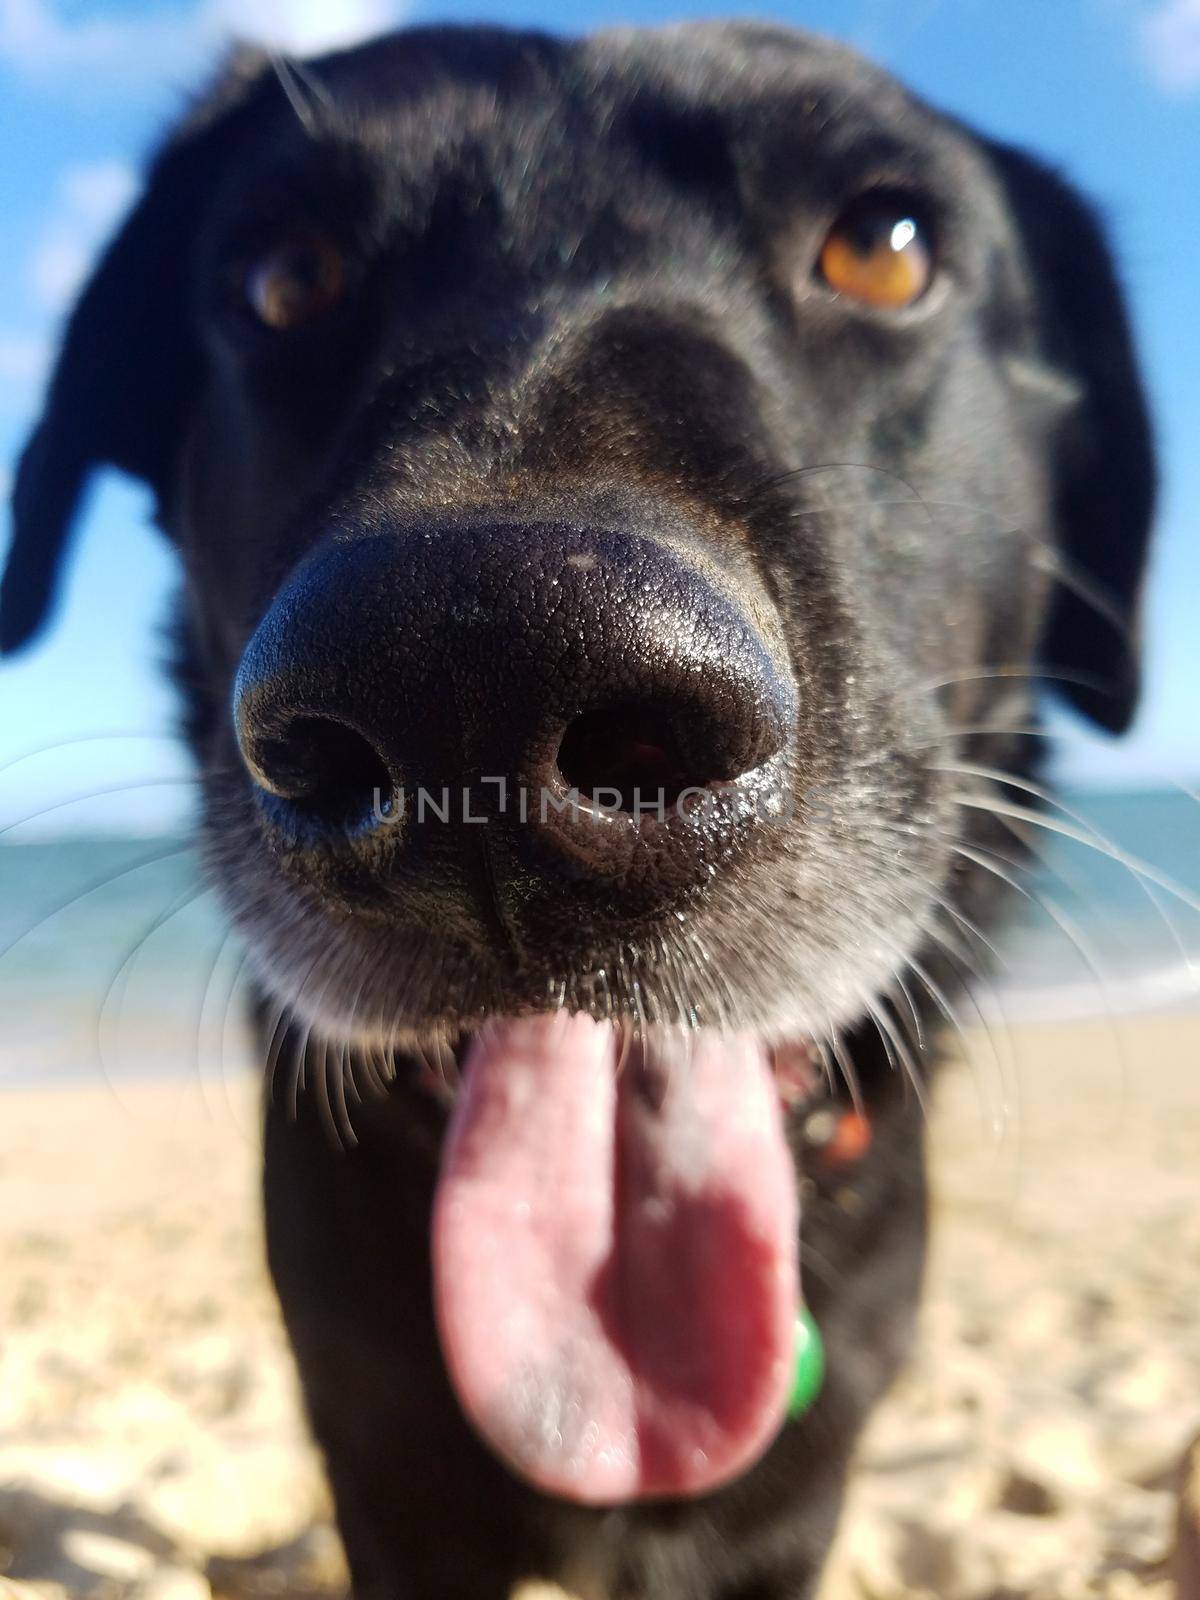 Black retriever Dog with tongue hanging out on beach with view of Pacific ocean off coast of Oahu, Hawaii.